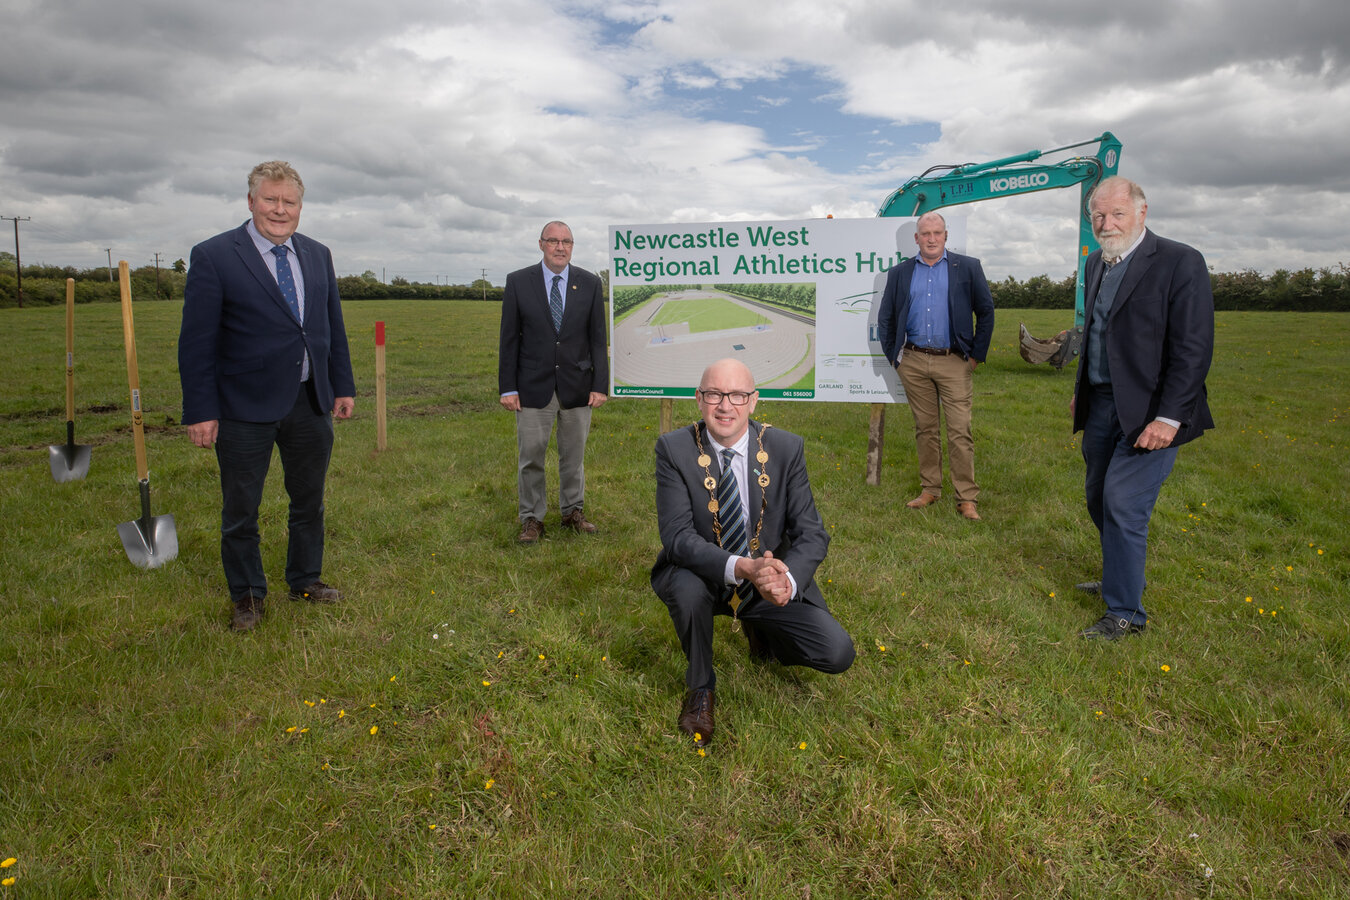 Newcastle West Regional Athletics Hub - Councillors Tom Ruddle, Francis Foley, Liam Galvin and Jerome Scanlon were pictured with Cathaoirleach Limerick City and County Council Michael Collins at the turning of the first sod. Picture: Marie Keating.